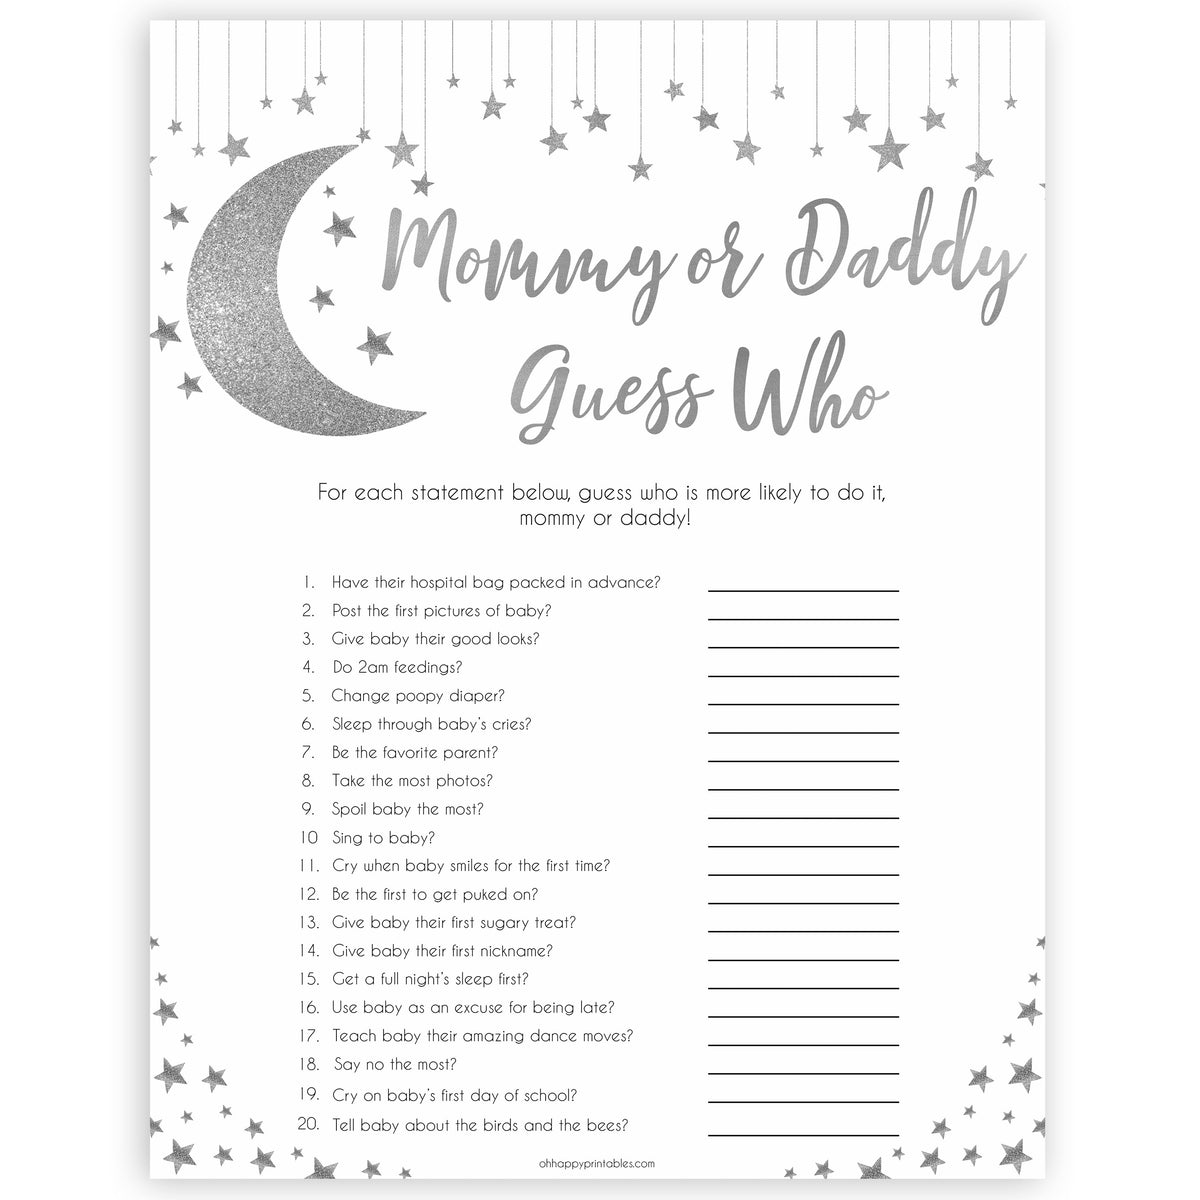 Silver little star, guess who mommy or daddy baby games, baby shower games, printable baby games, fun baby games, twinkle little star games, baby games, fun baby shower ideas, baby shower ideas